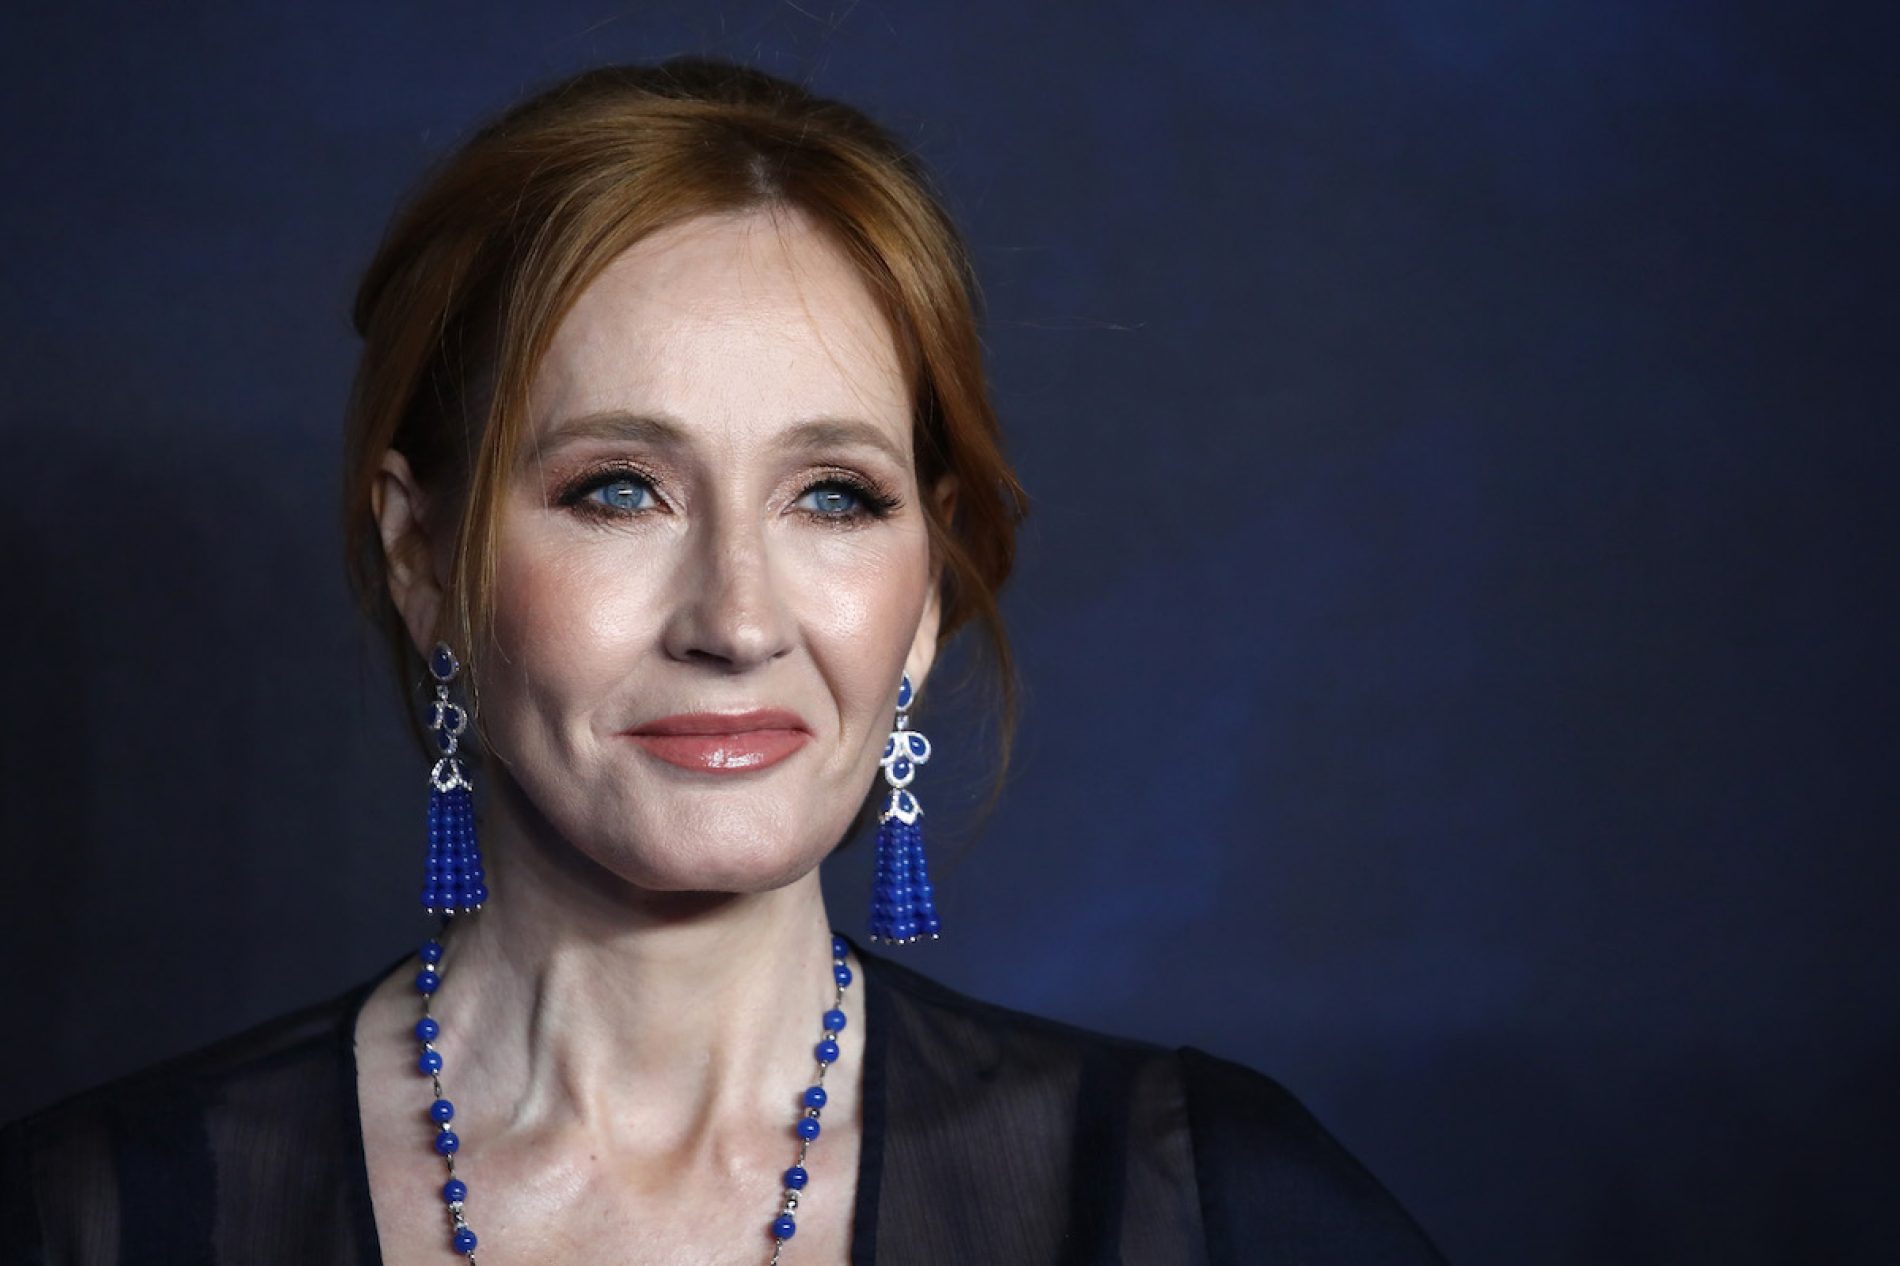 JK Rowling gets slammed with transphobia accusations, for defending a feminist fired for anti-trans views